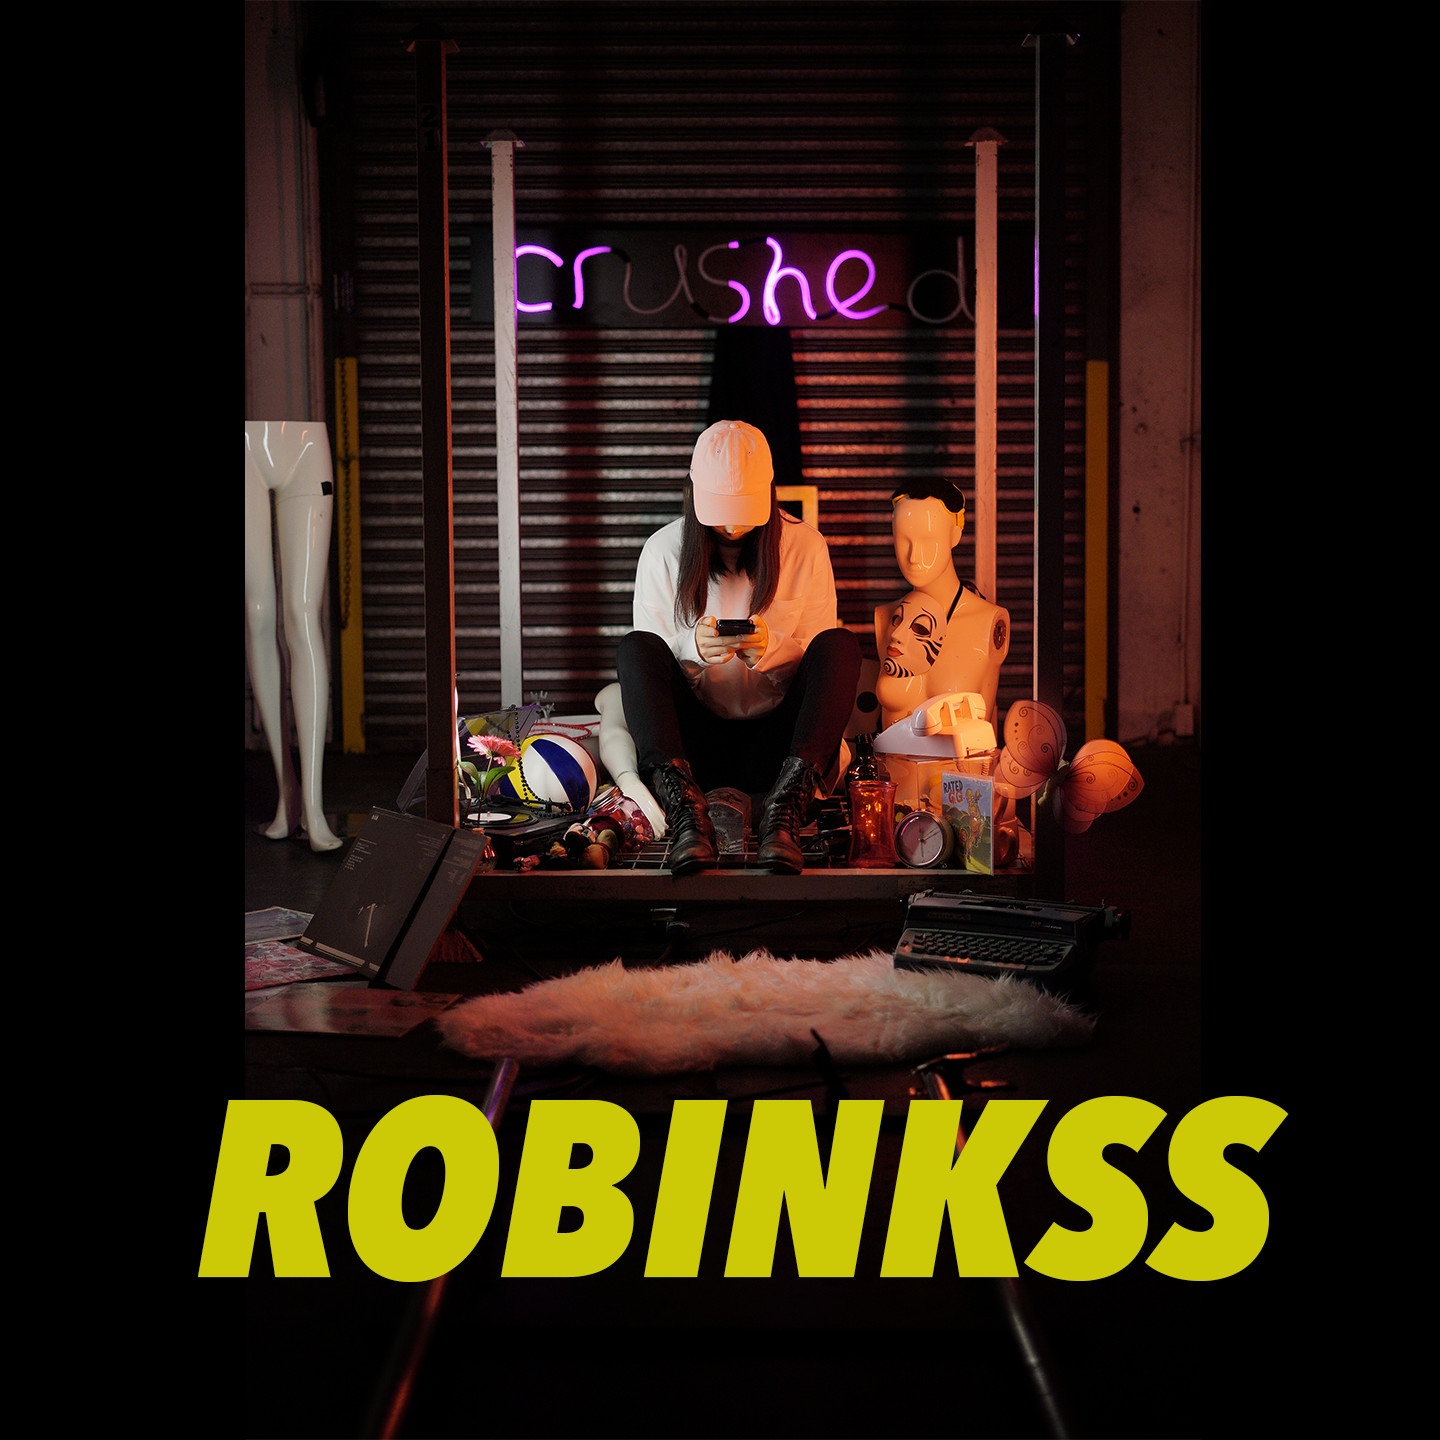 New Music: Robinkss – Crushed​ |